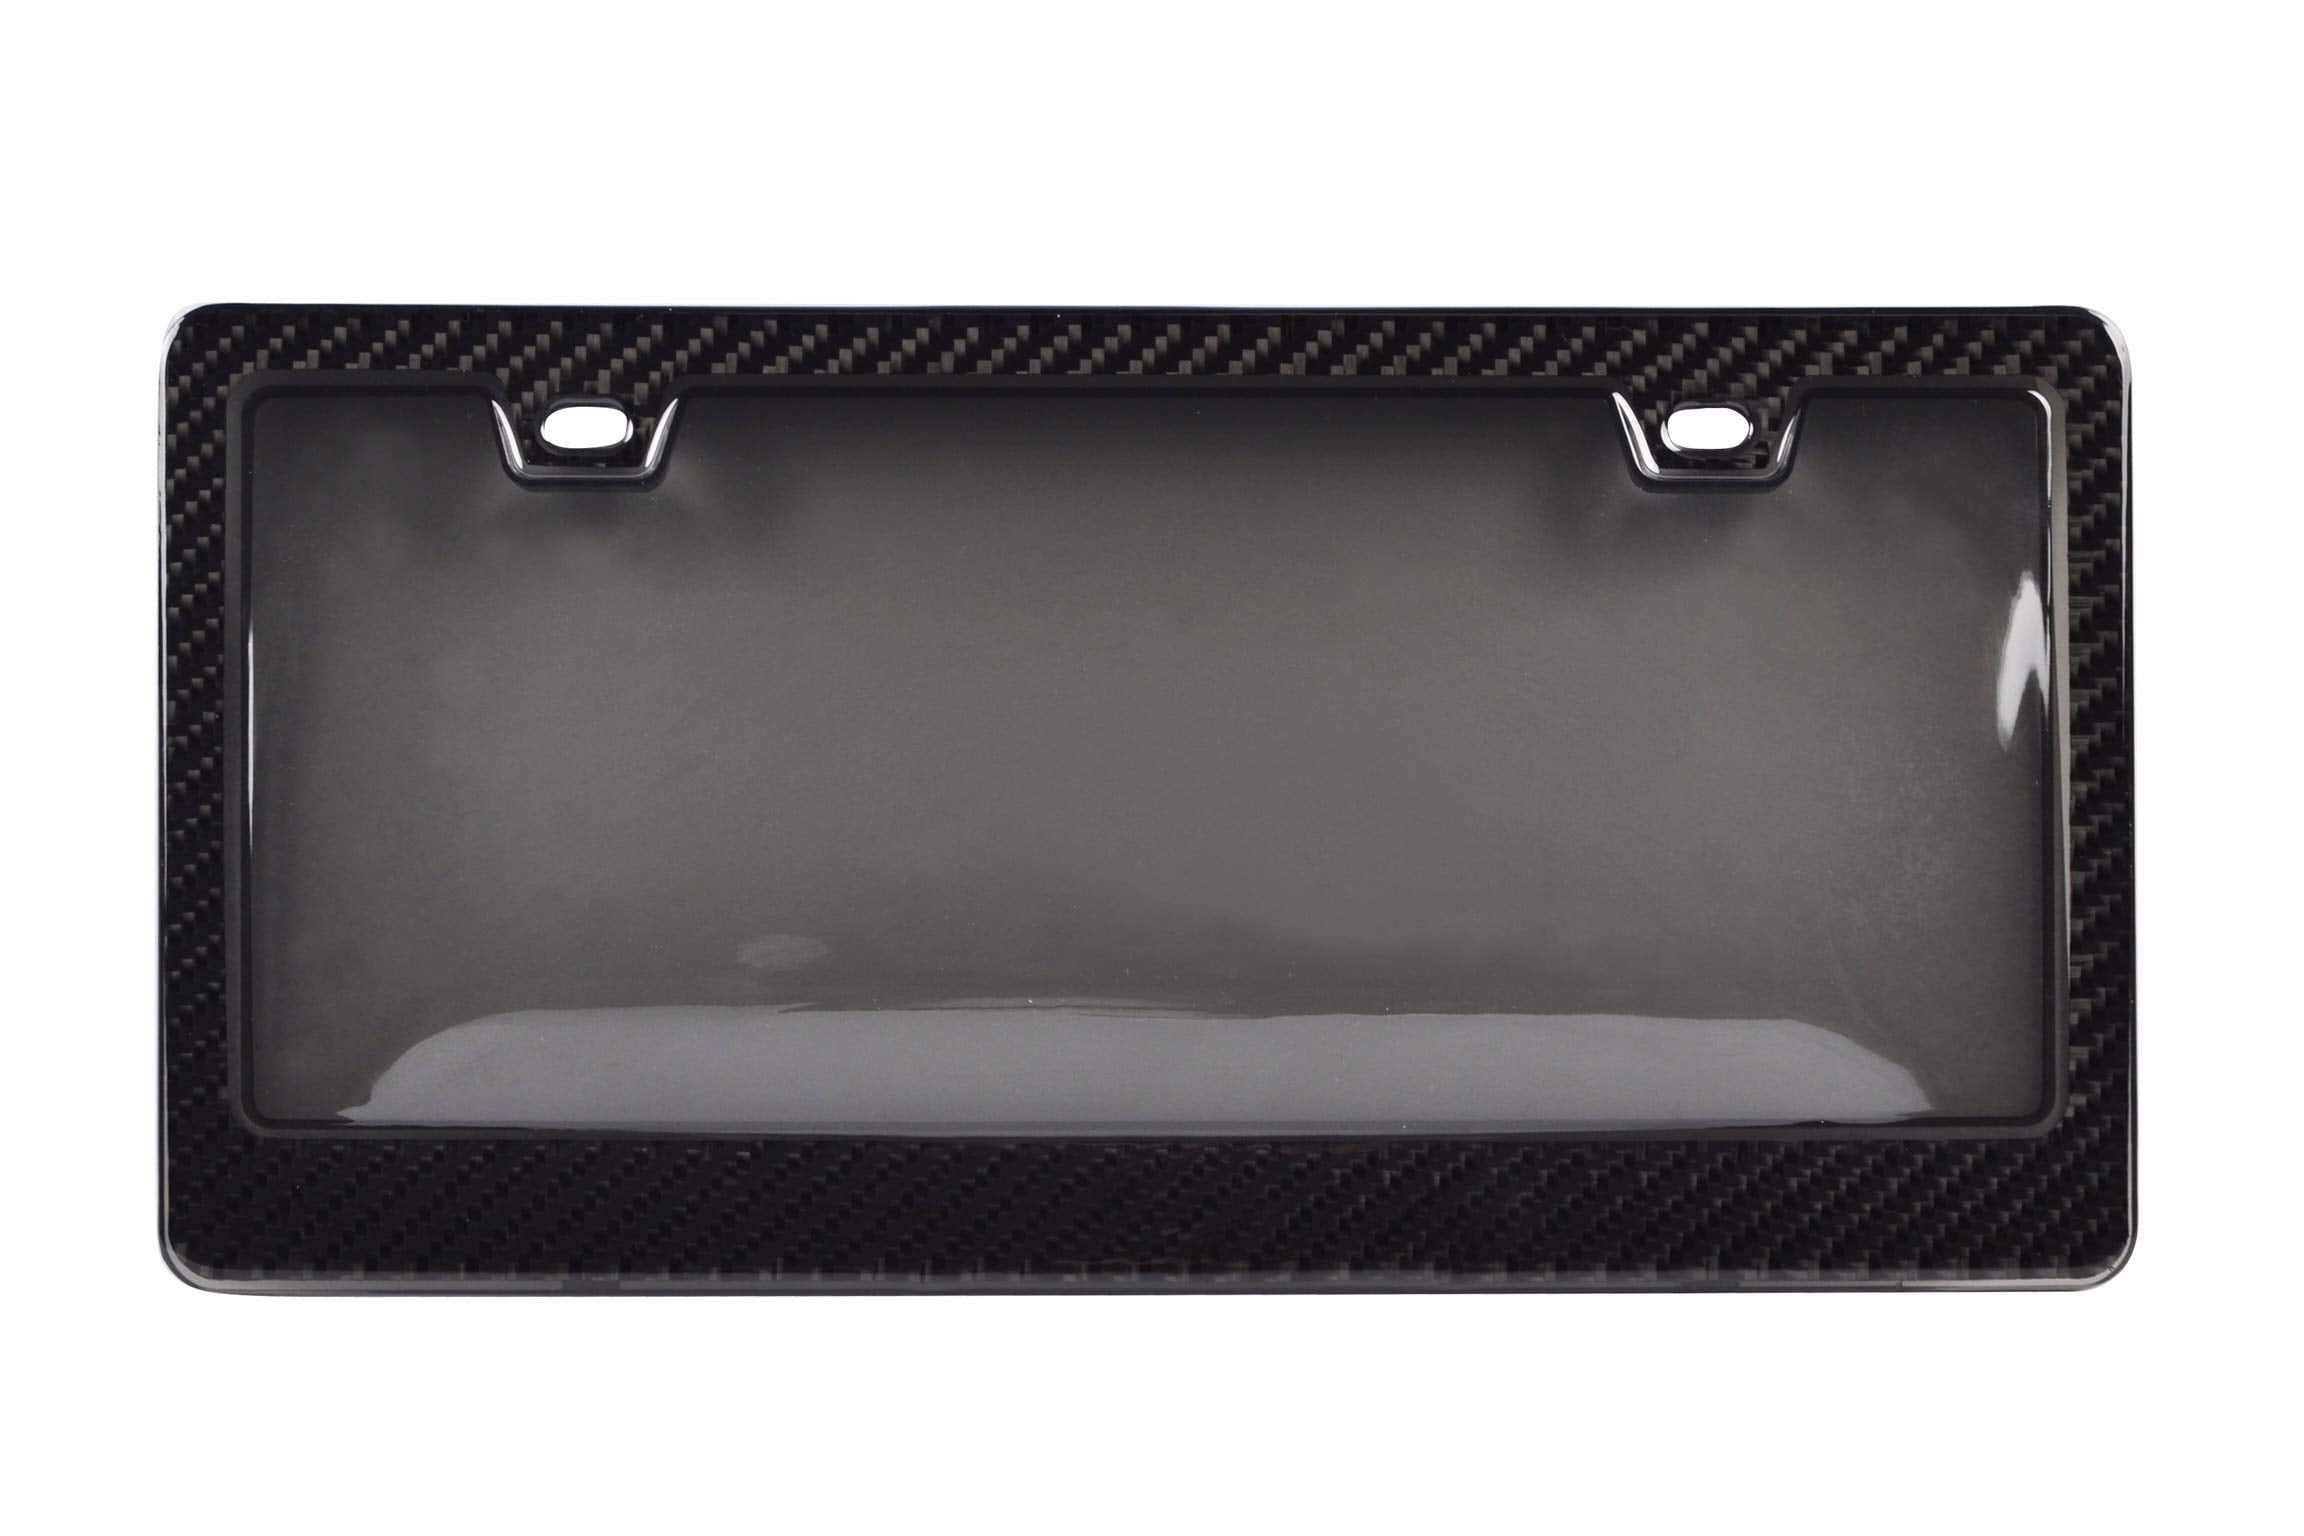 100% REAL GLOSSY BLACK CARBON FIBER USA US CAR VEHICLE LICENSE PLATE FRAME COVER